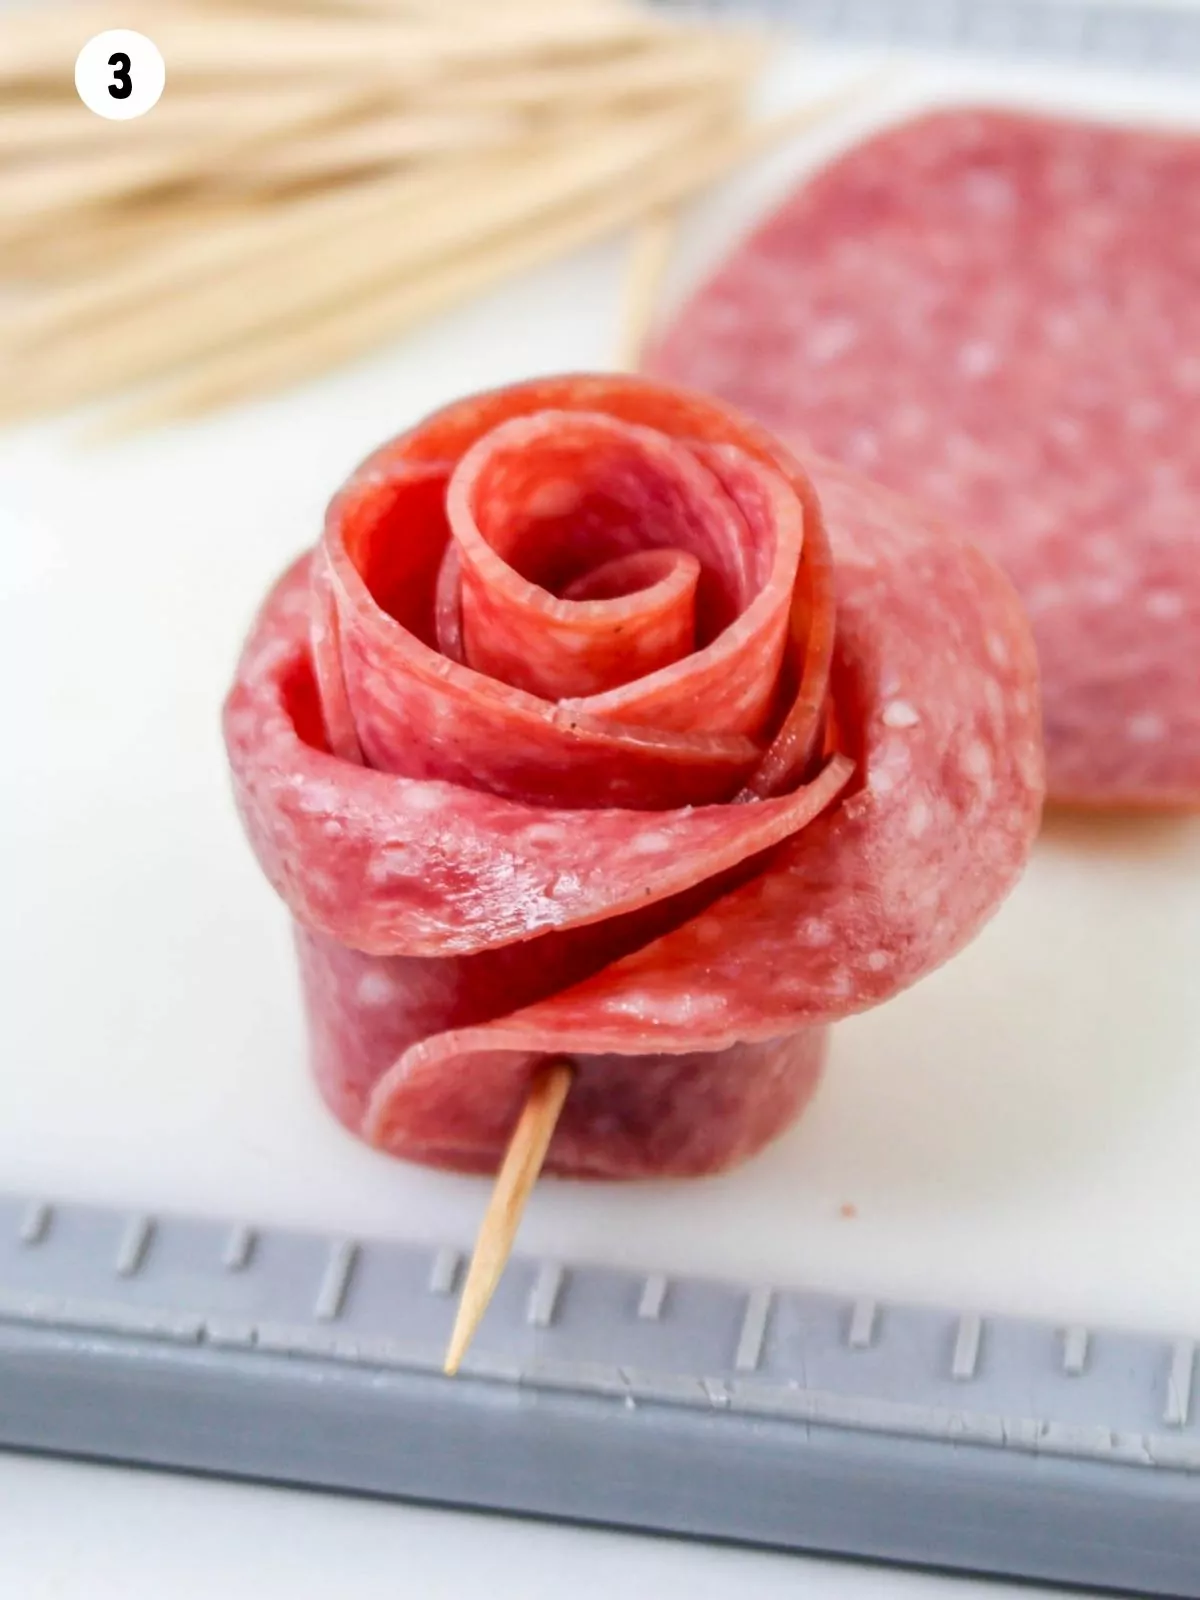 salami rose with toothpick.